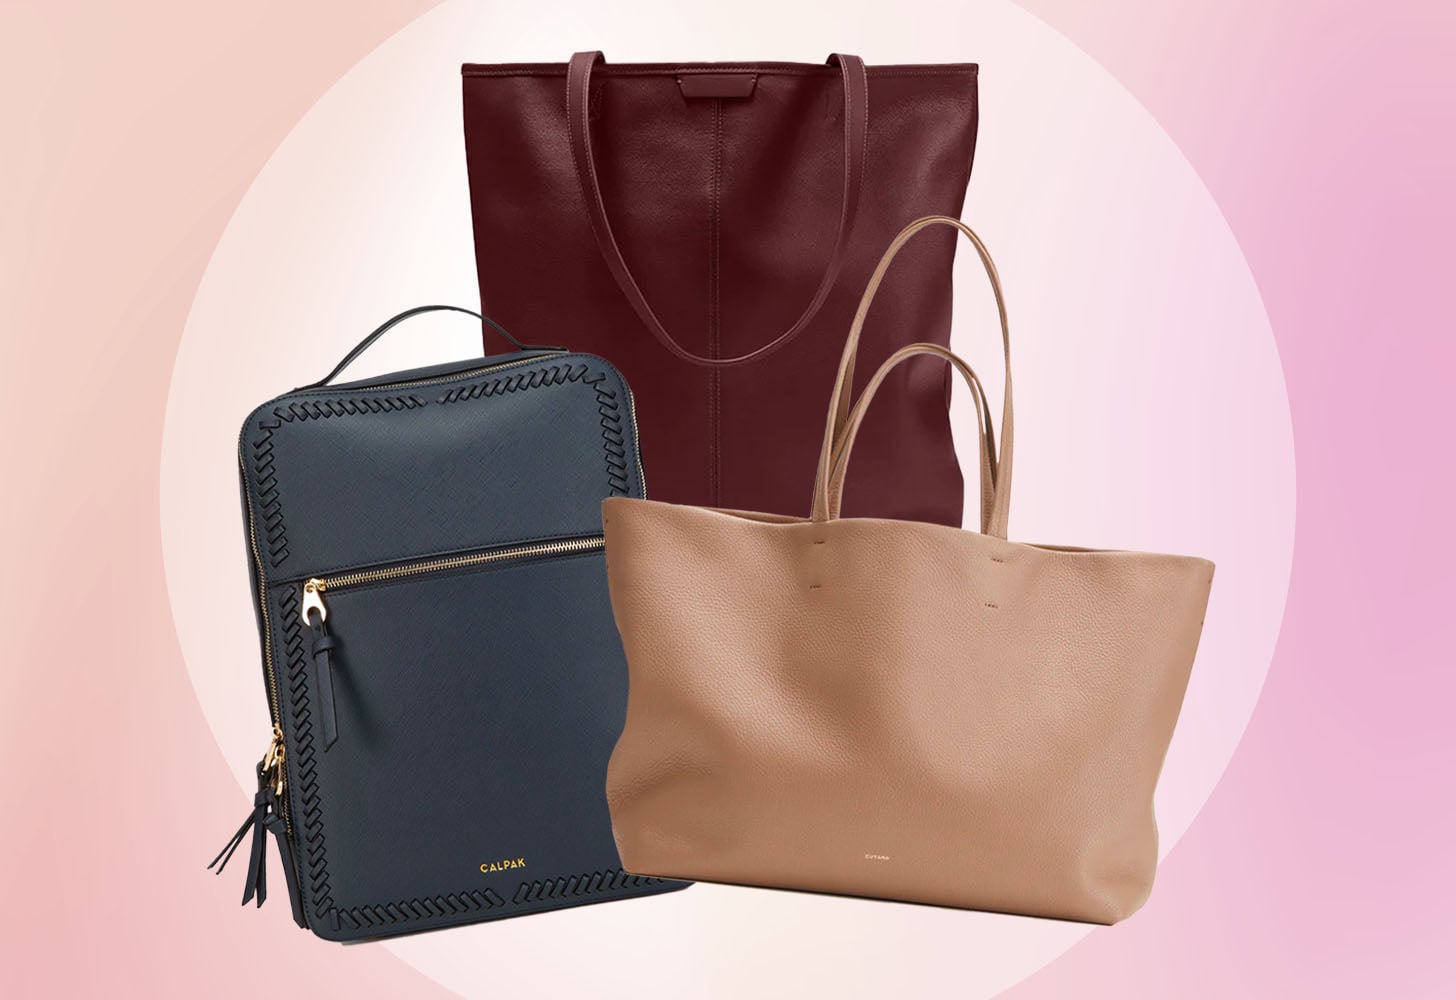 5 Essential Reasons Why You Must Add a Tote Bag to Your Closet in 2022